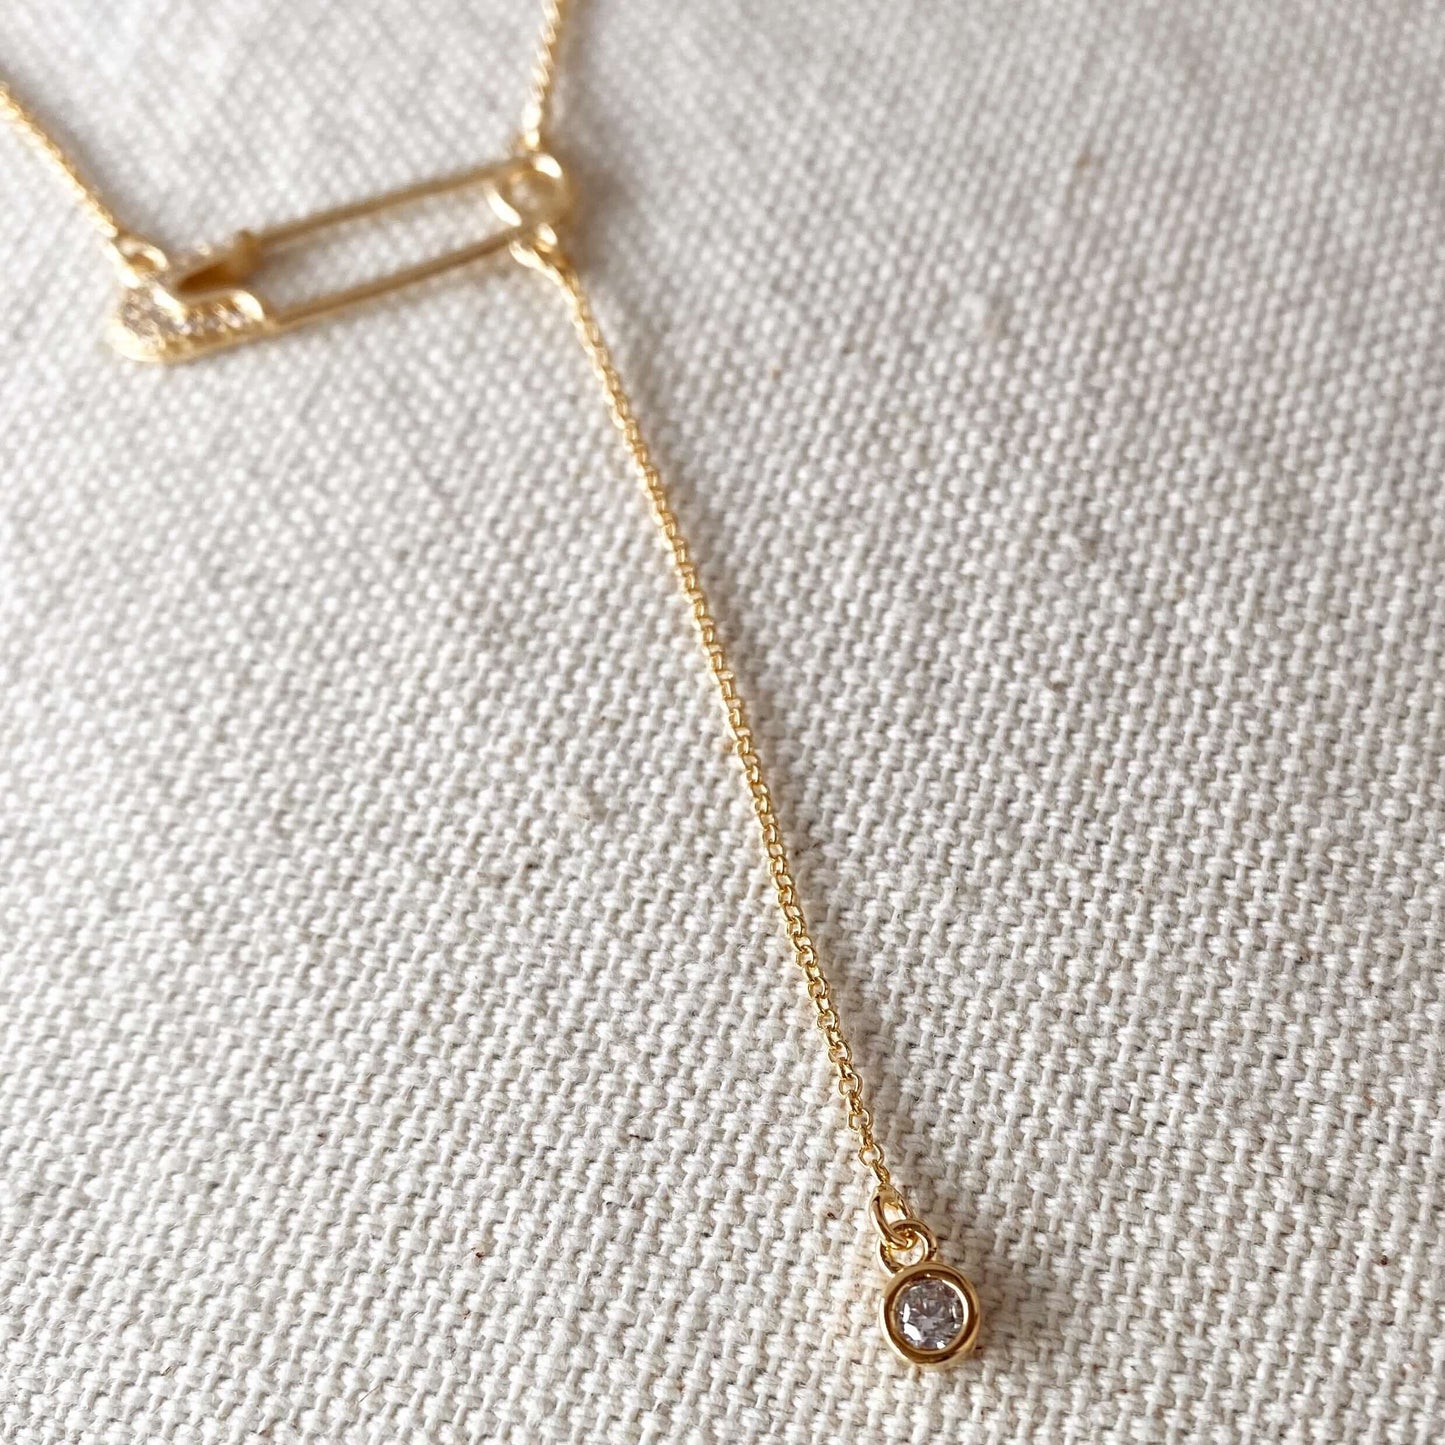 GoldFi 18k Gold Filled Safety Pin Necklace Featuring Cubic Zirconia Accents